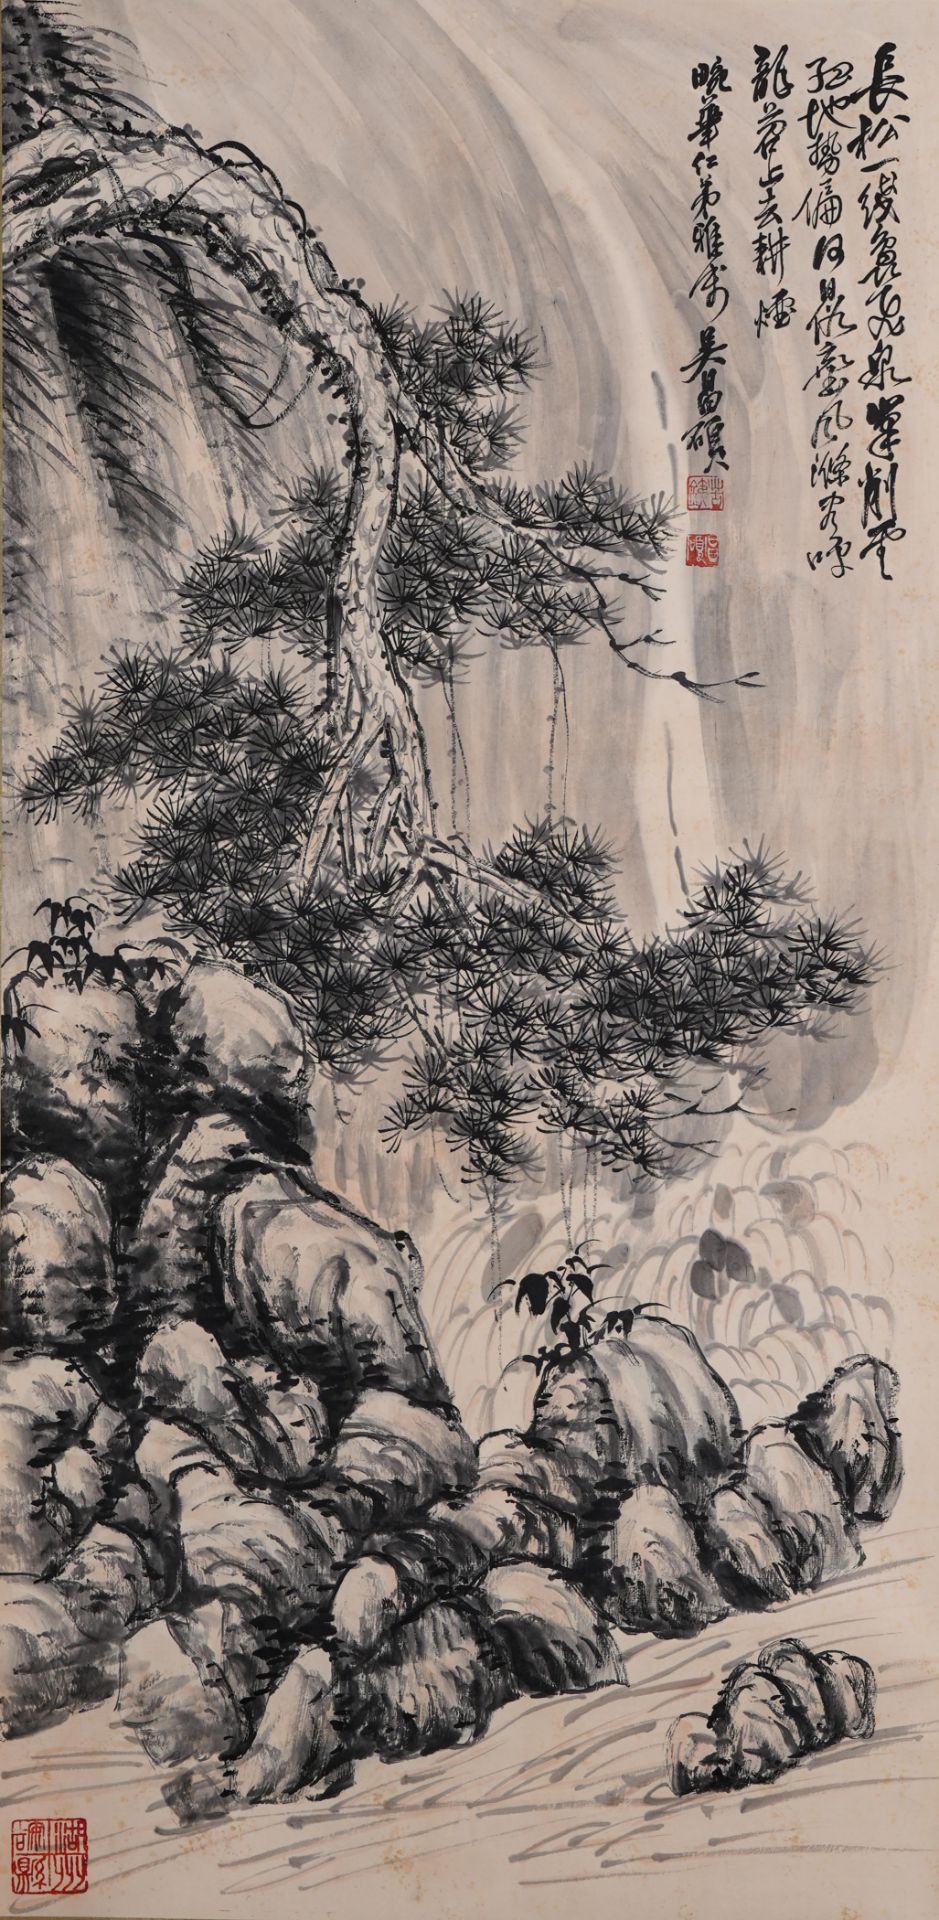 A Chinese Scroll Painting by Wu Changshuo - Image 2 of 8